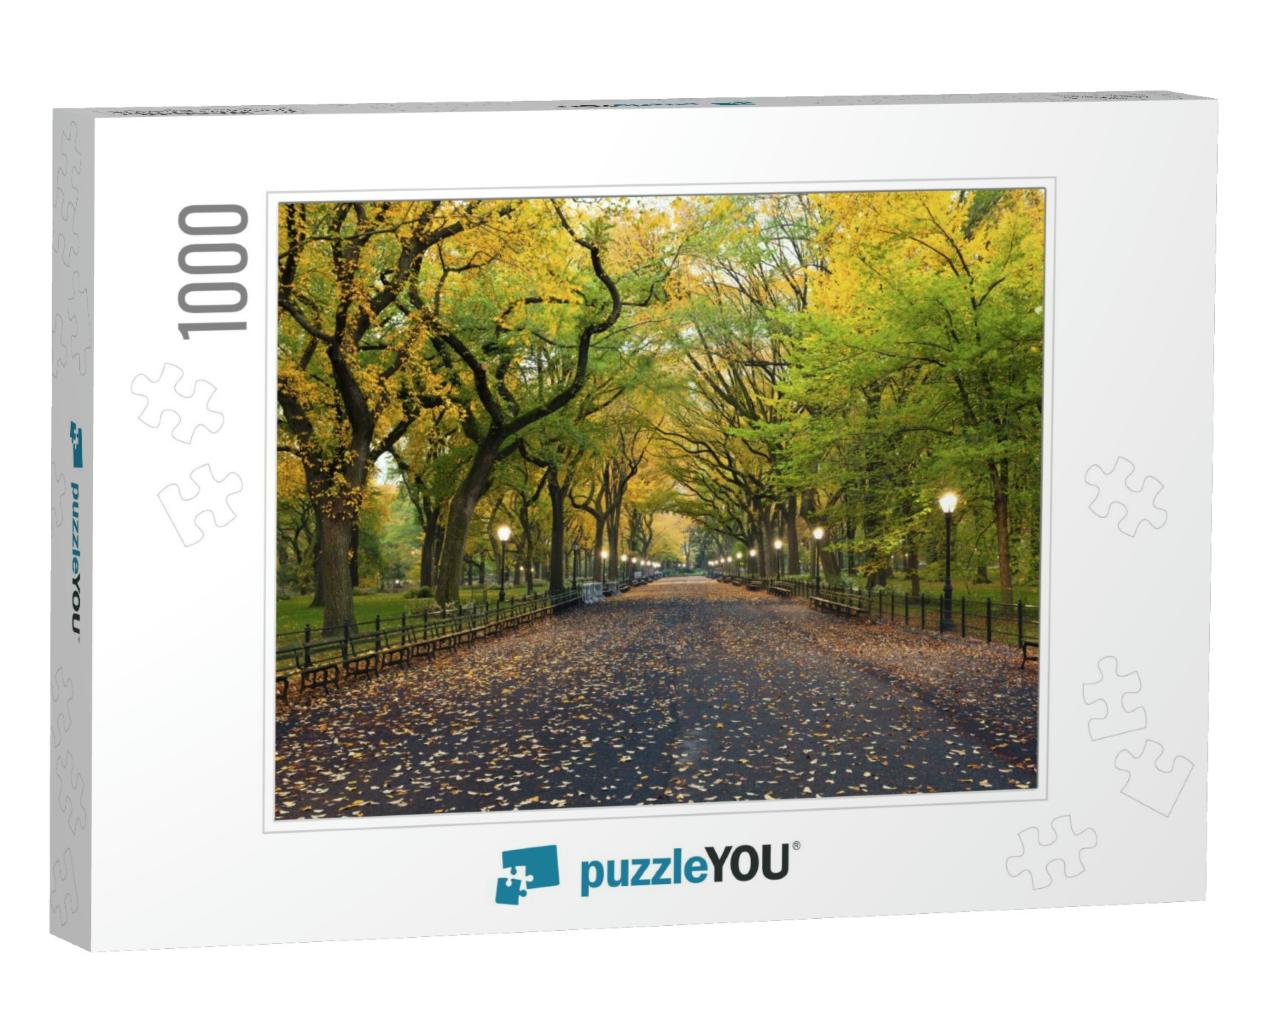 Central Park. Image of the Mall Area in Central Park, New... Jigsaw Puzzle with 1000 pieces